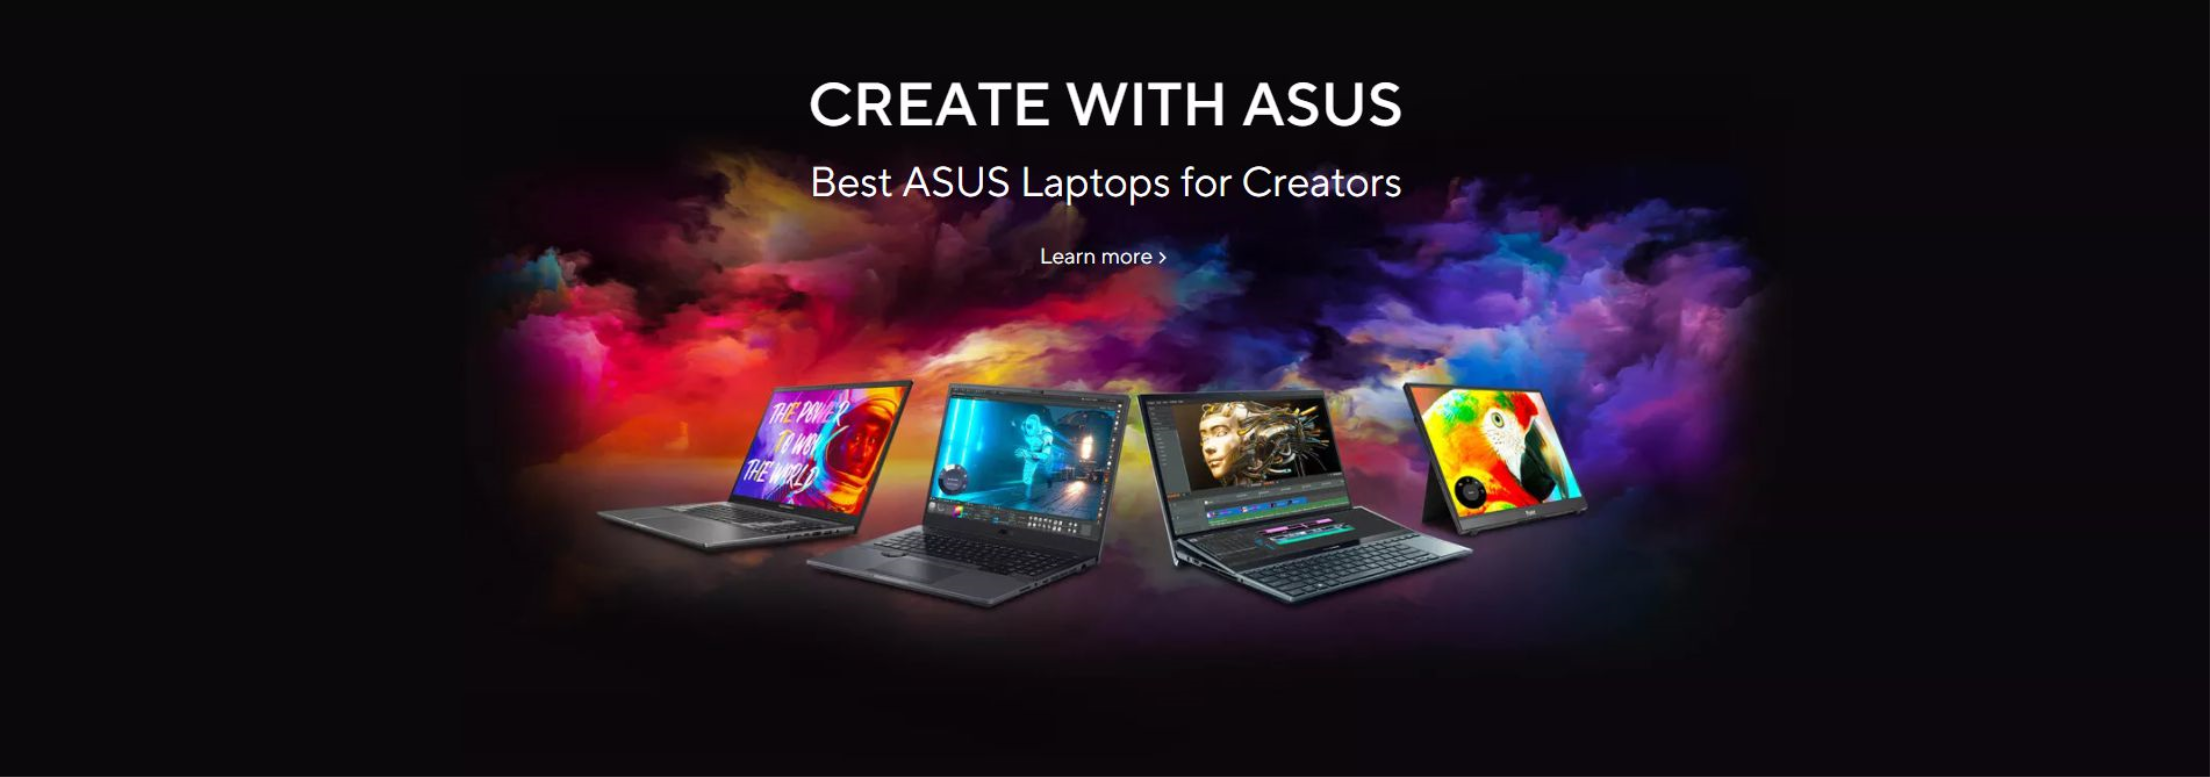 Create with ASUS